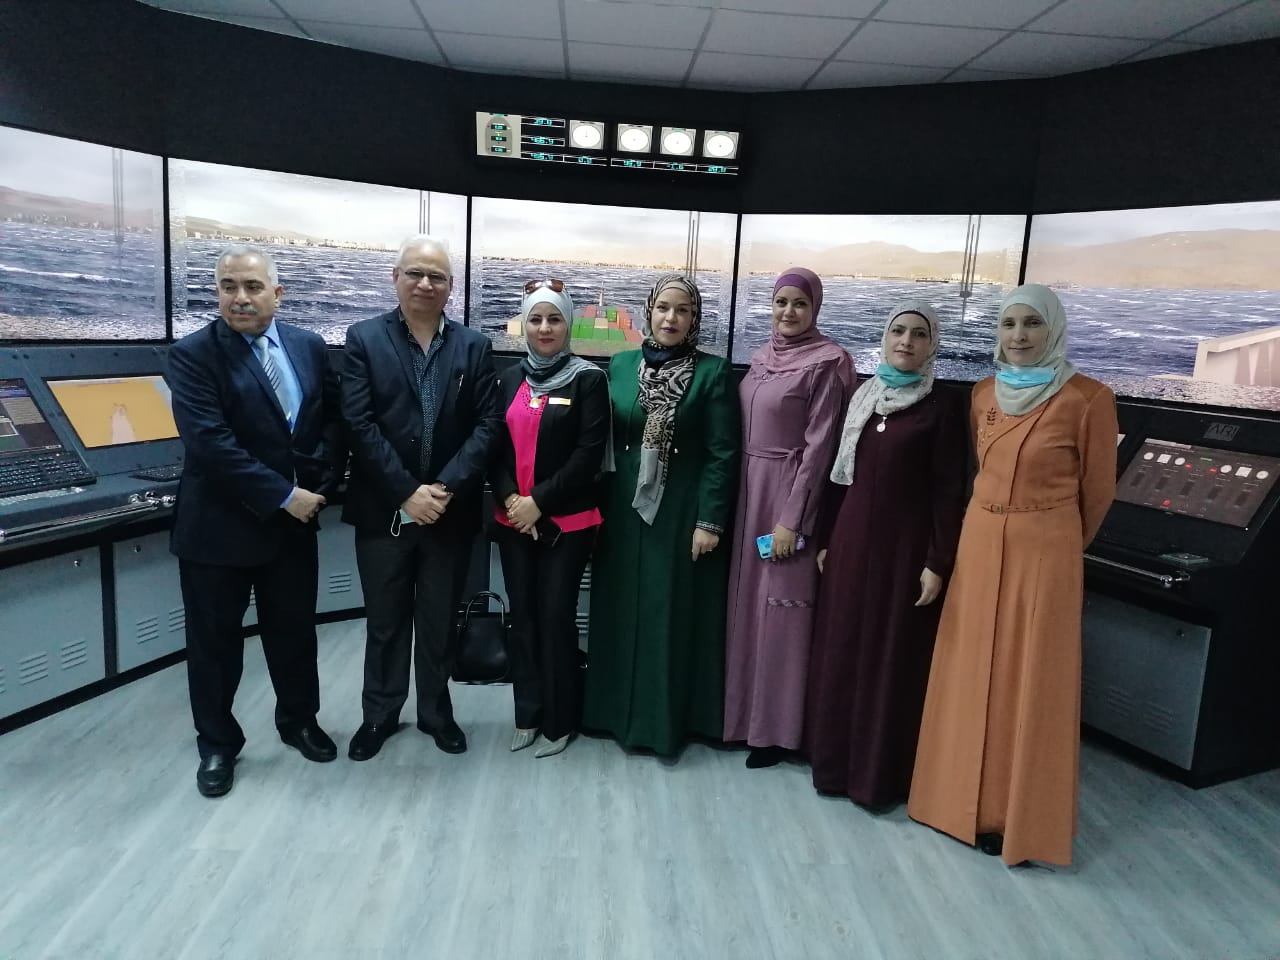 In the presence and generous support of the Director General of the Jordan Maritime commission, Engineer Muhammad Salman, the Arab Women Association working in the maritime sector awima, represented by the members of the Executive Council, Mrs. Reem Kteish & Miss / Wafa Al-Momani, on an introductory visit to the workers at the Aqaba Maritime Education and Training Center of the Al-Balqa Applied University